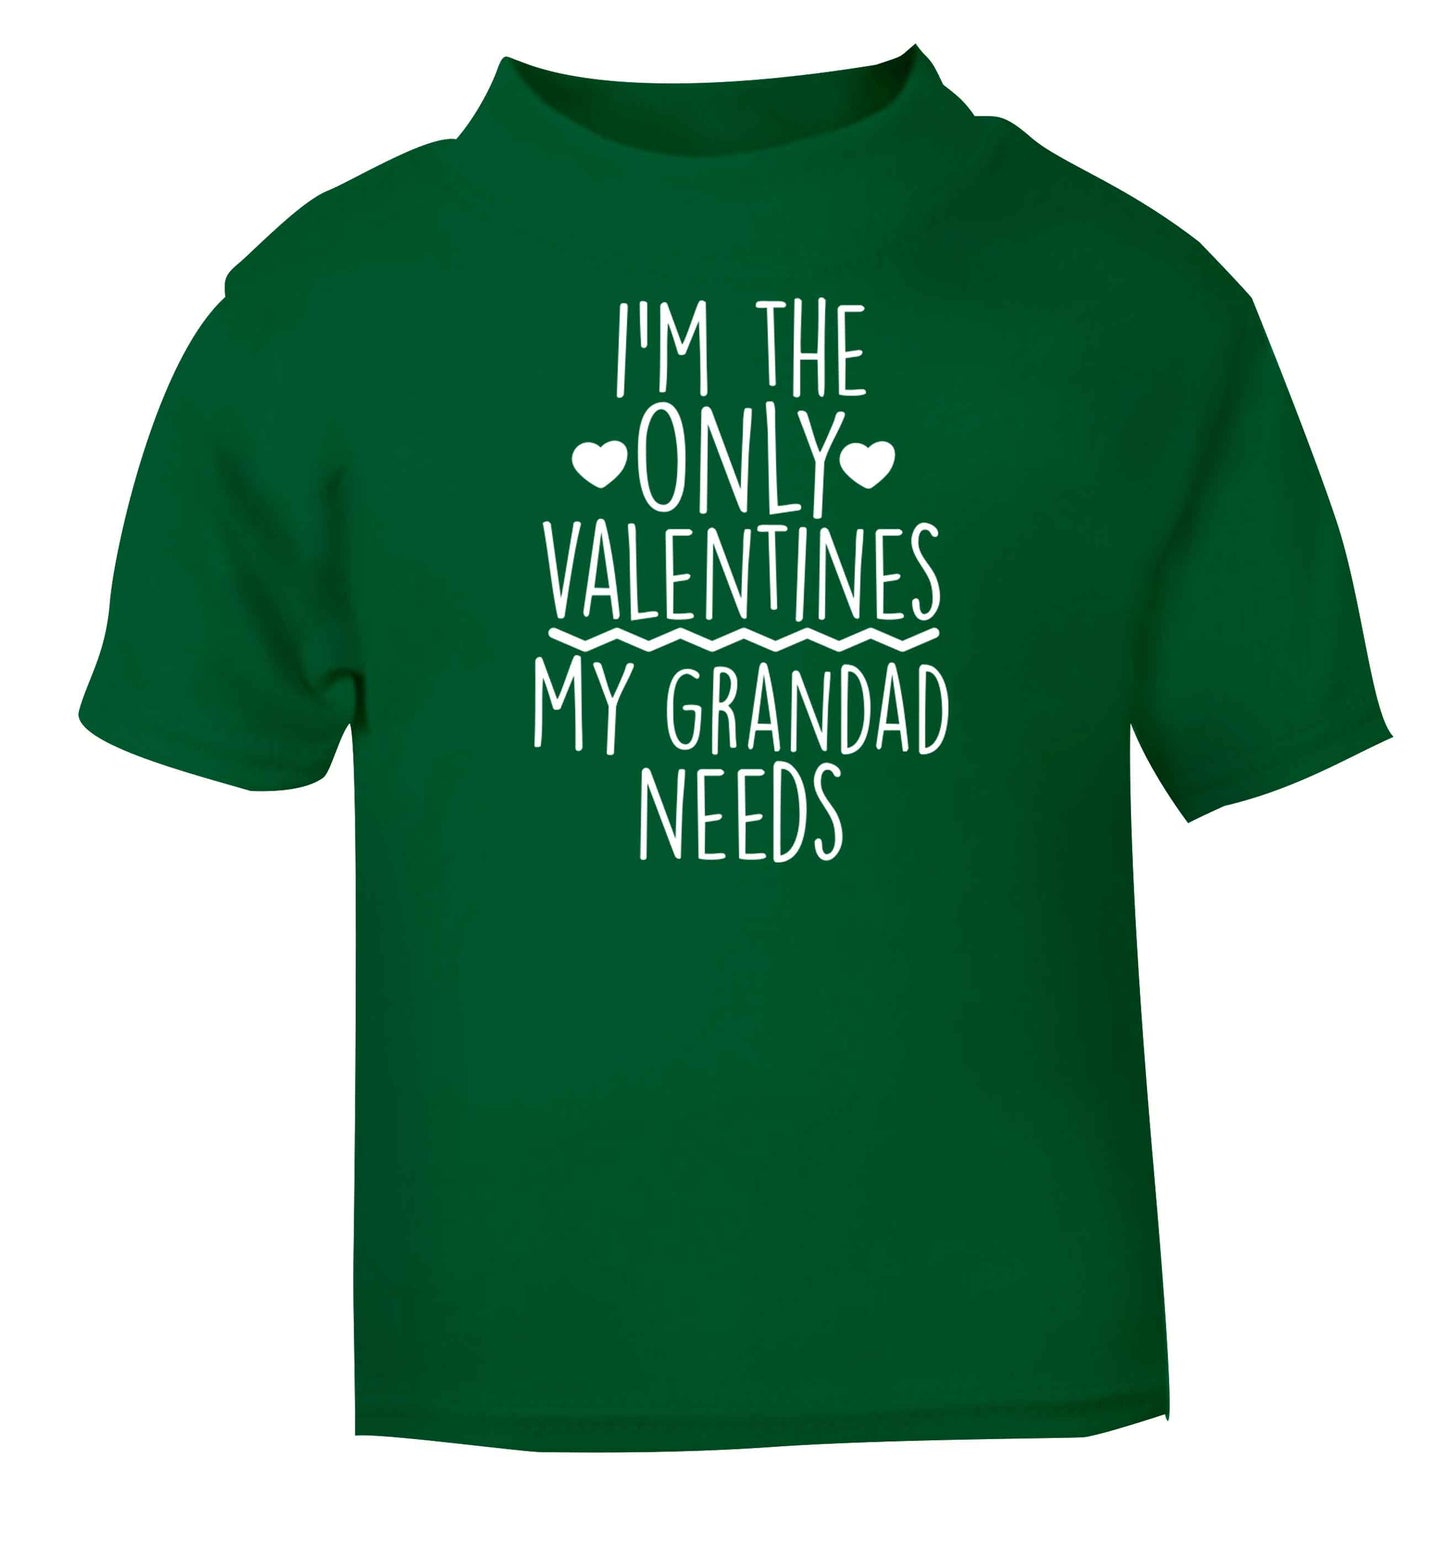 I'm the only valentines my grandad needs green baby toddler Tshirt 2 Years